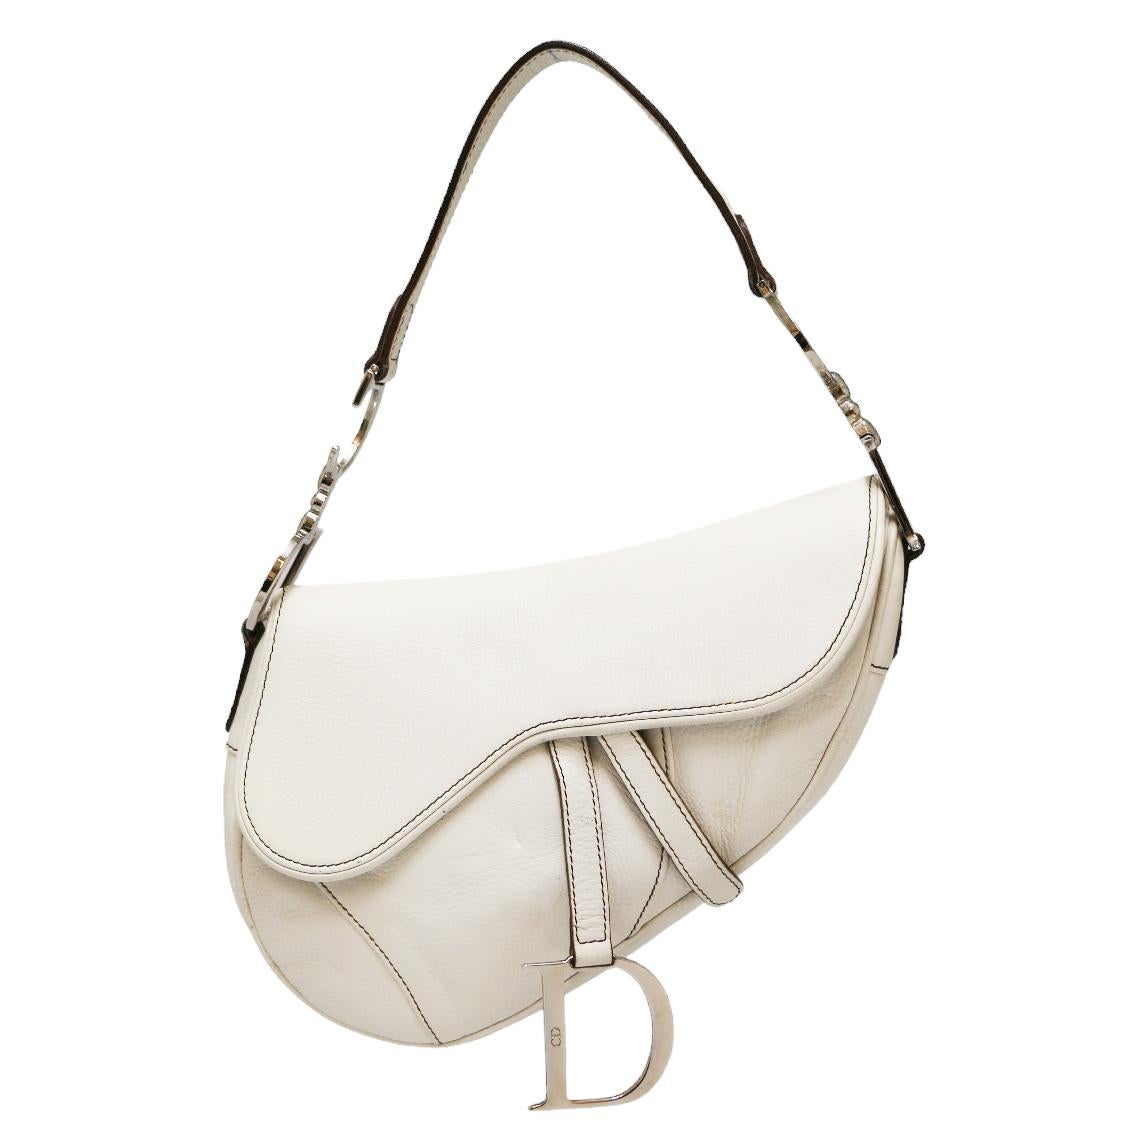 Amazing vintage Christian Dior original saddle bag from 2002 in white leather
Condition : good
Made in Italy
Model : Saddle
Material : leather
Interior : brown monogram fabric
Color : white
Dimensions : 25.5 x 20 x 6.5 cm
Serial number : yes
Year :